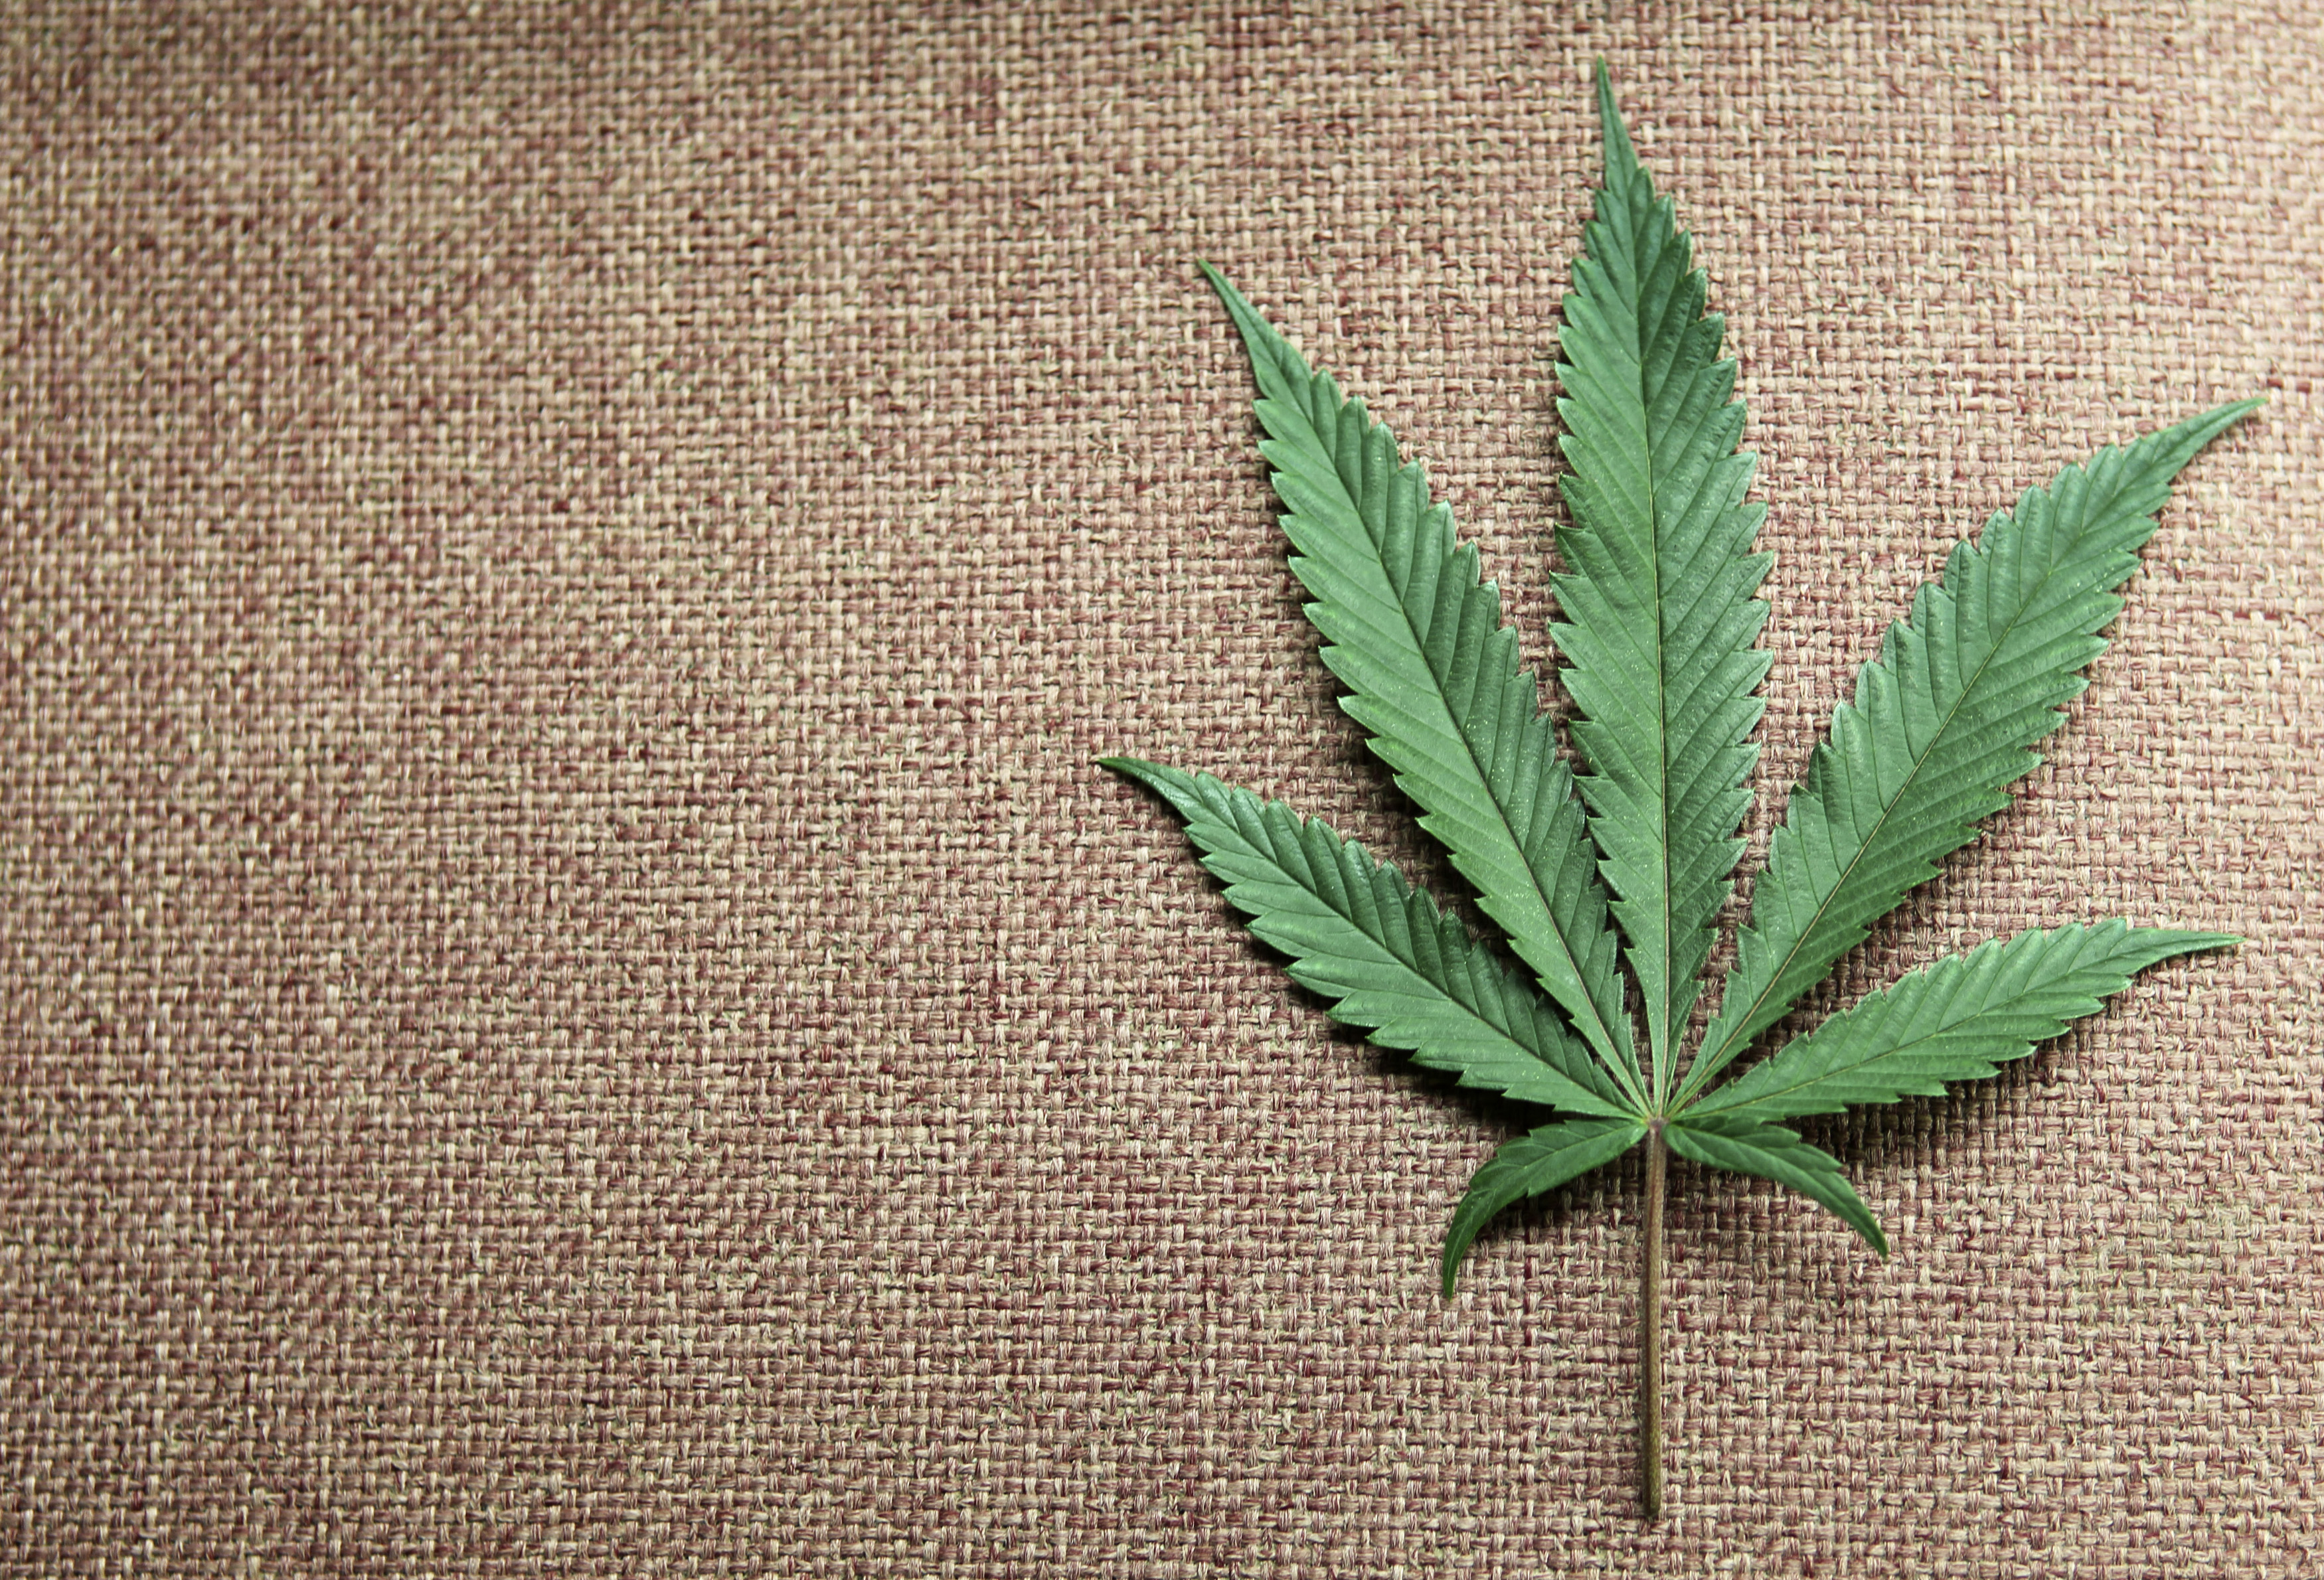 Marijuana Commercial: First Big-Time Ad to Air on Major Networks | Time